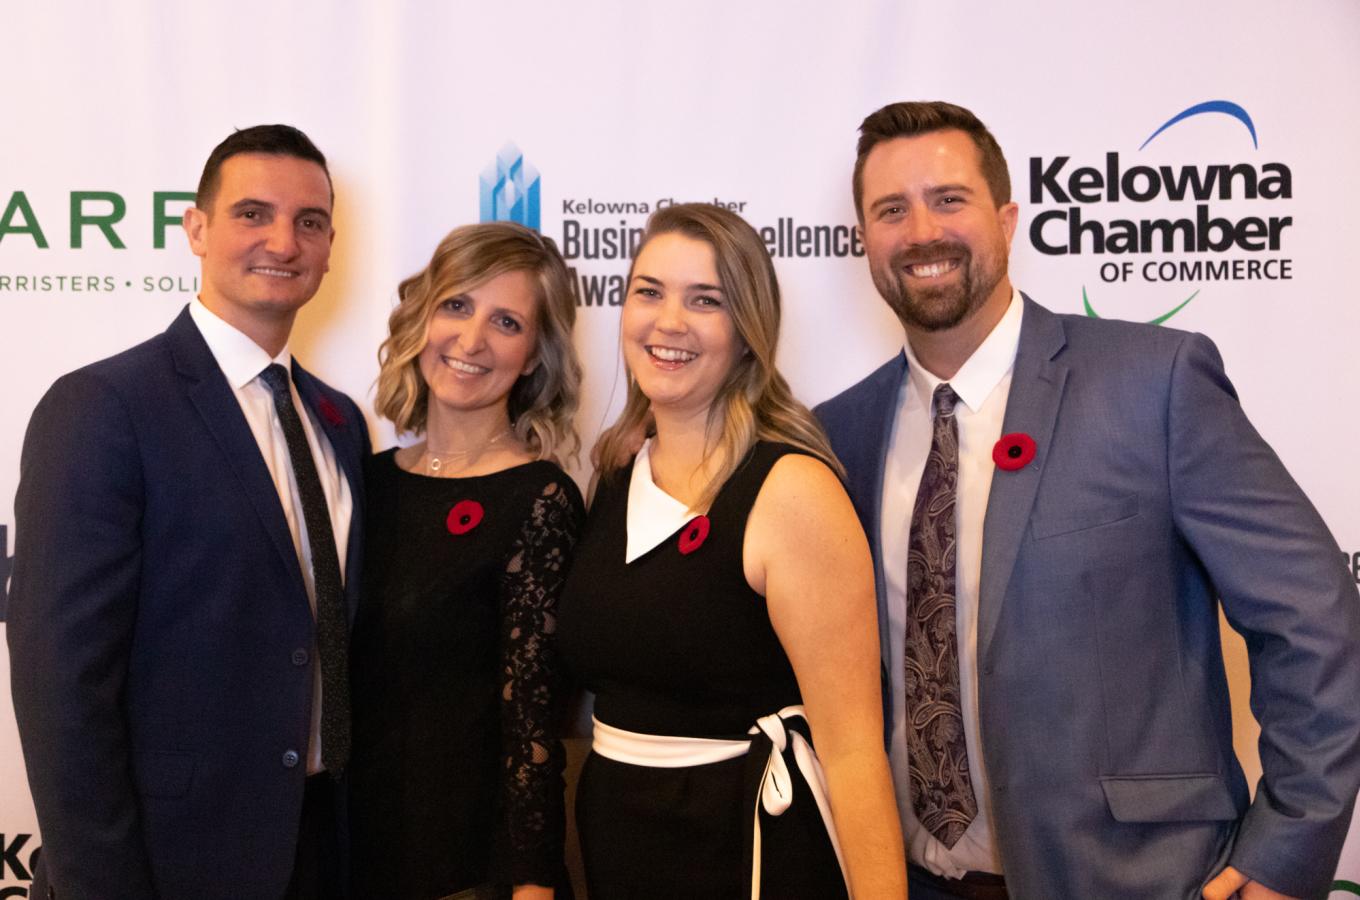 Best in Tourism, 2019 at the Kelowna Chamber of Commerce Awards